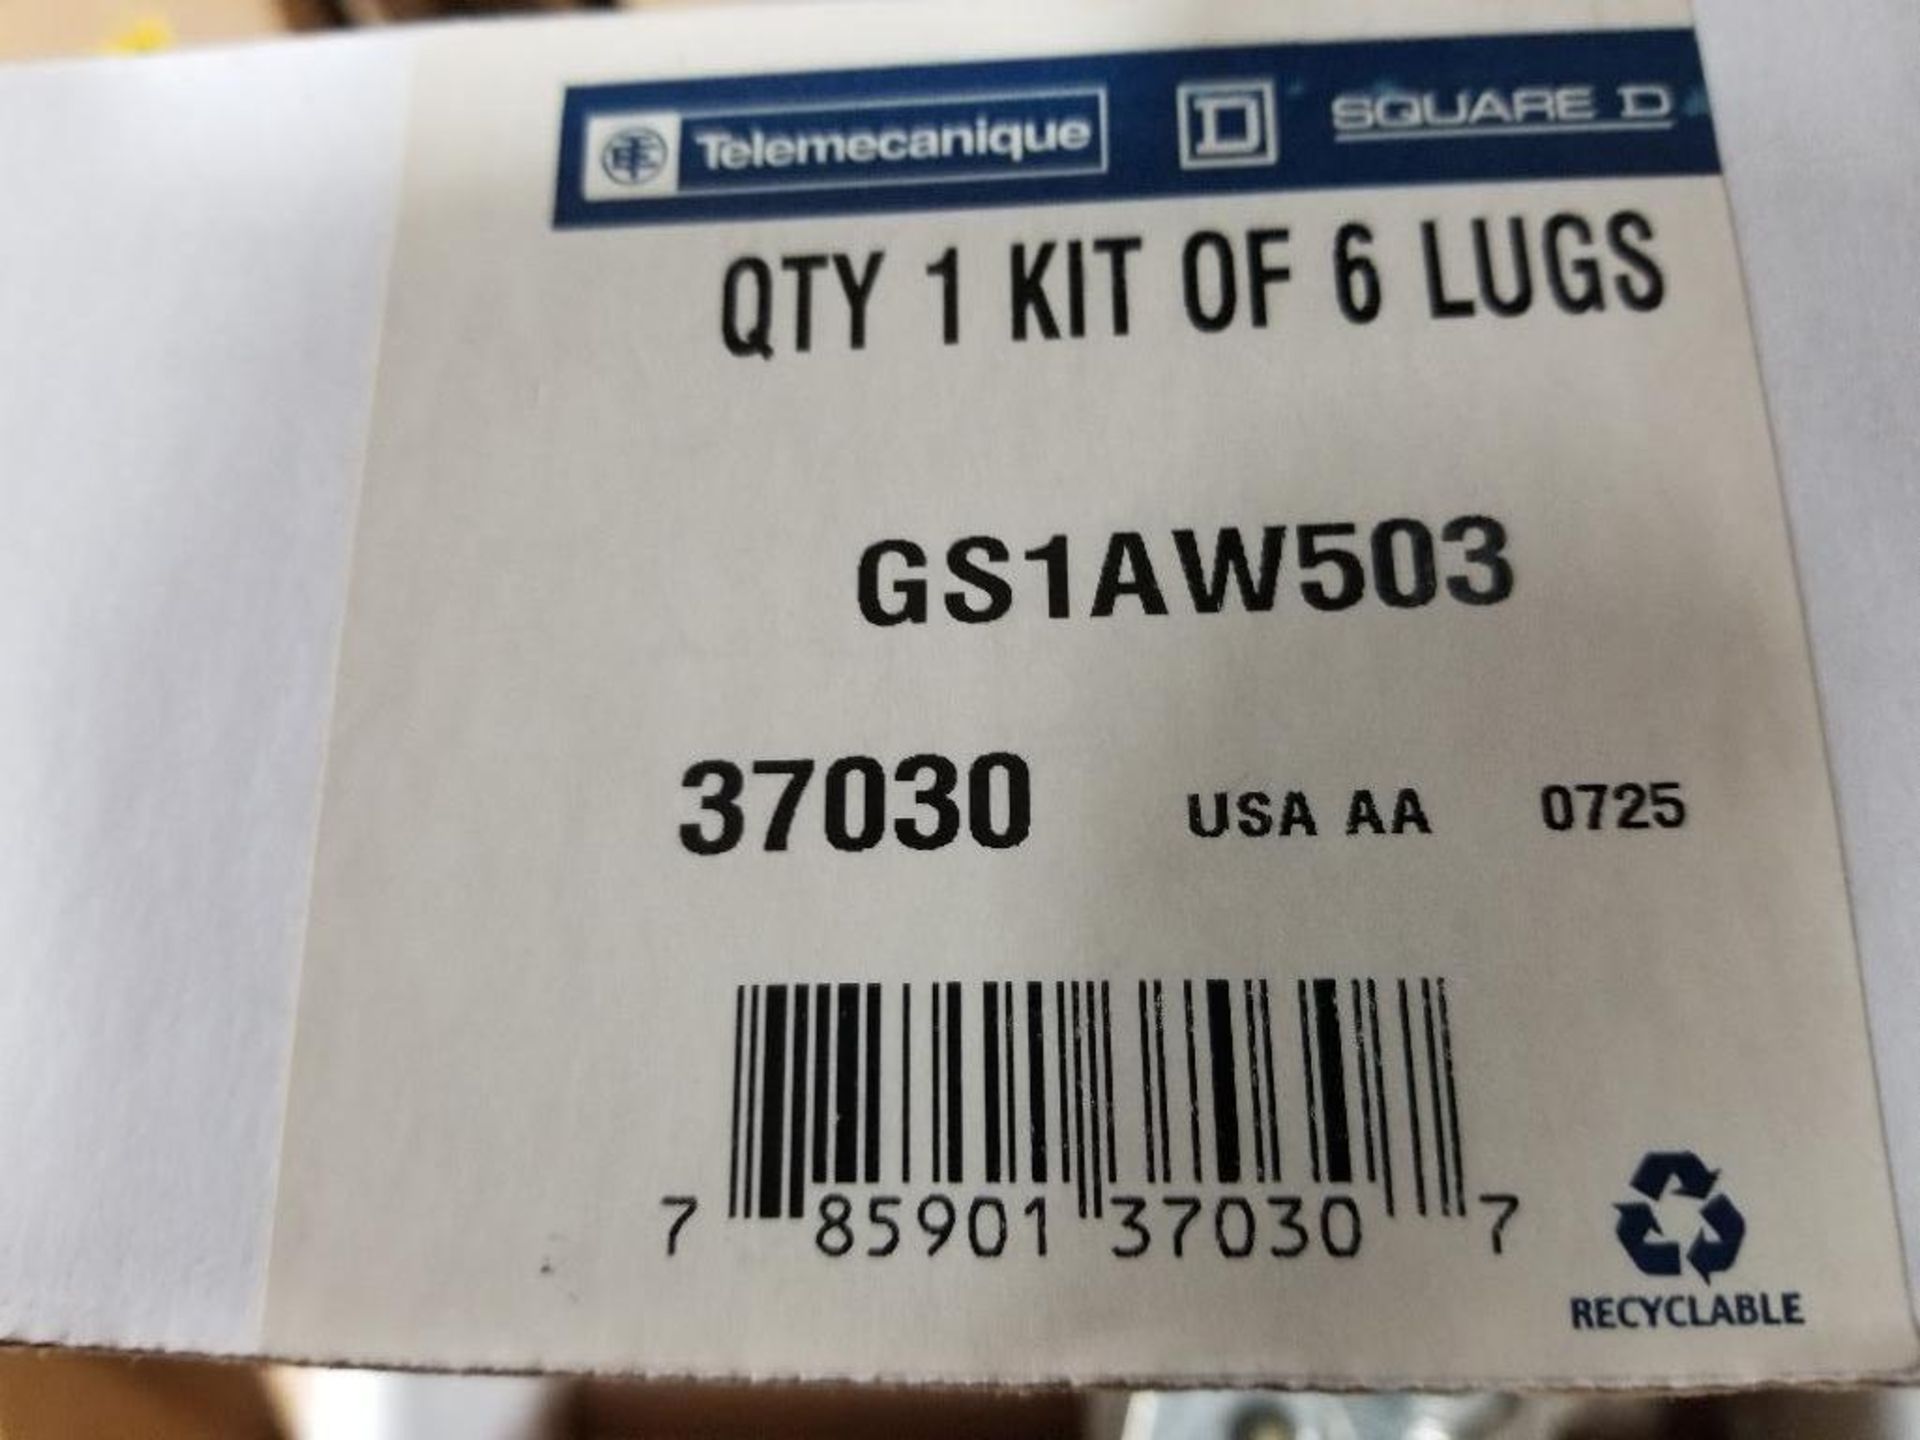 Qty 2 - Telemecanique lug kits. Part number GS1AW503. 6 per kit. New in box. - Image 3 of 3